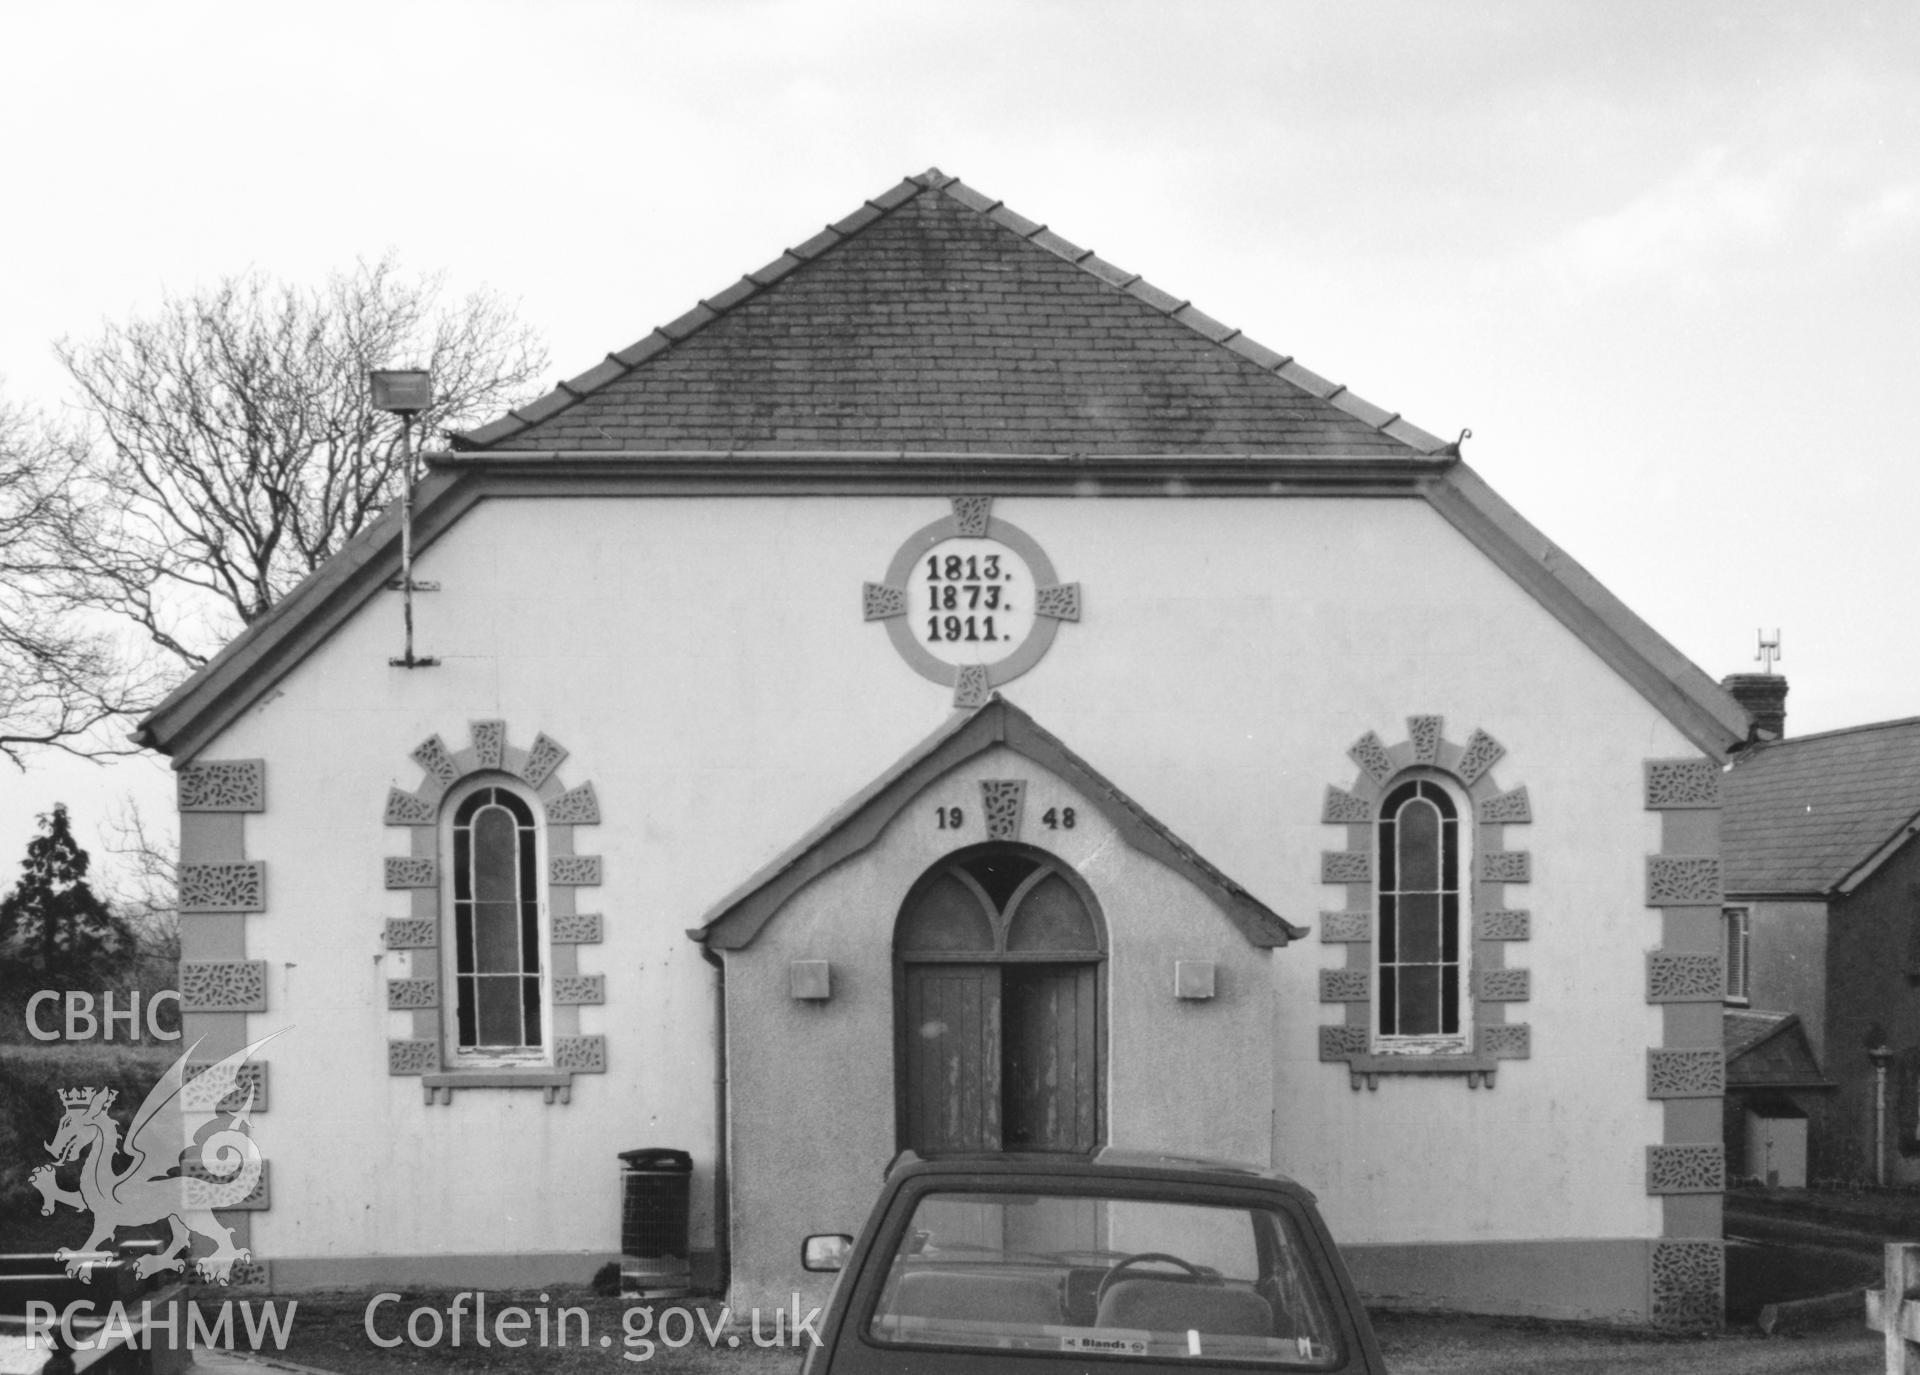 Digital copy of a black and white photograph showing exterior view of Wiston Chapel, taken by Robert Scourfield, 1996.